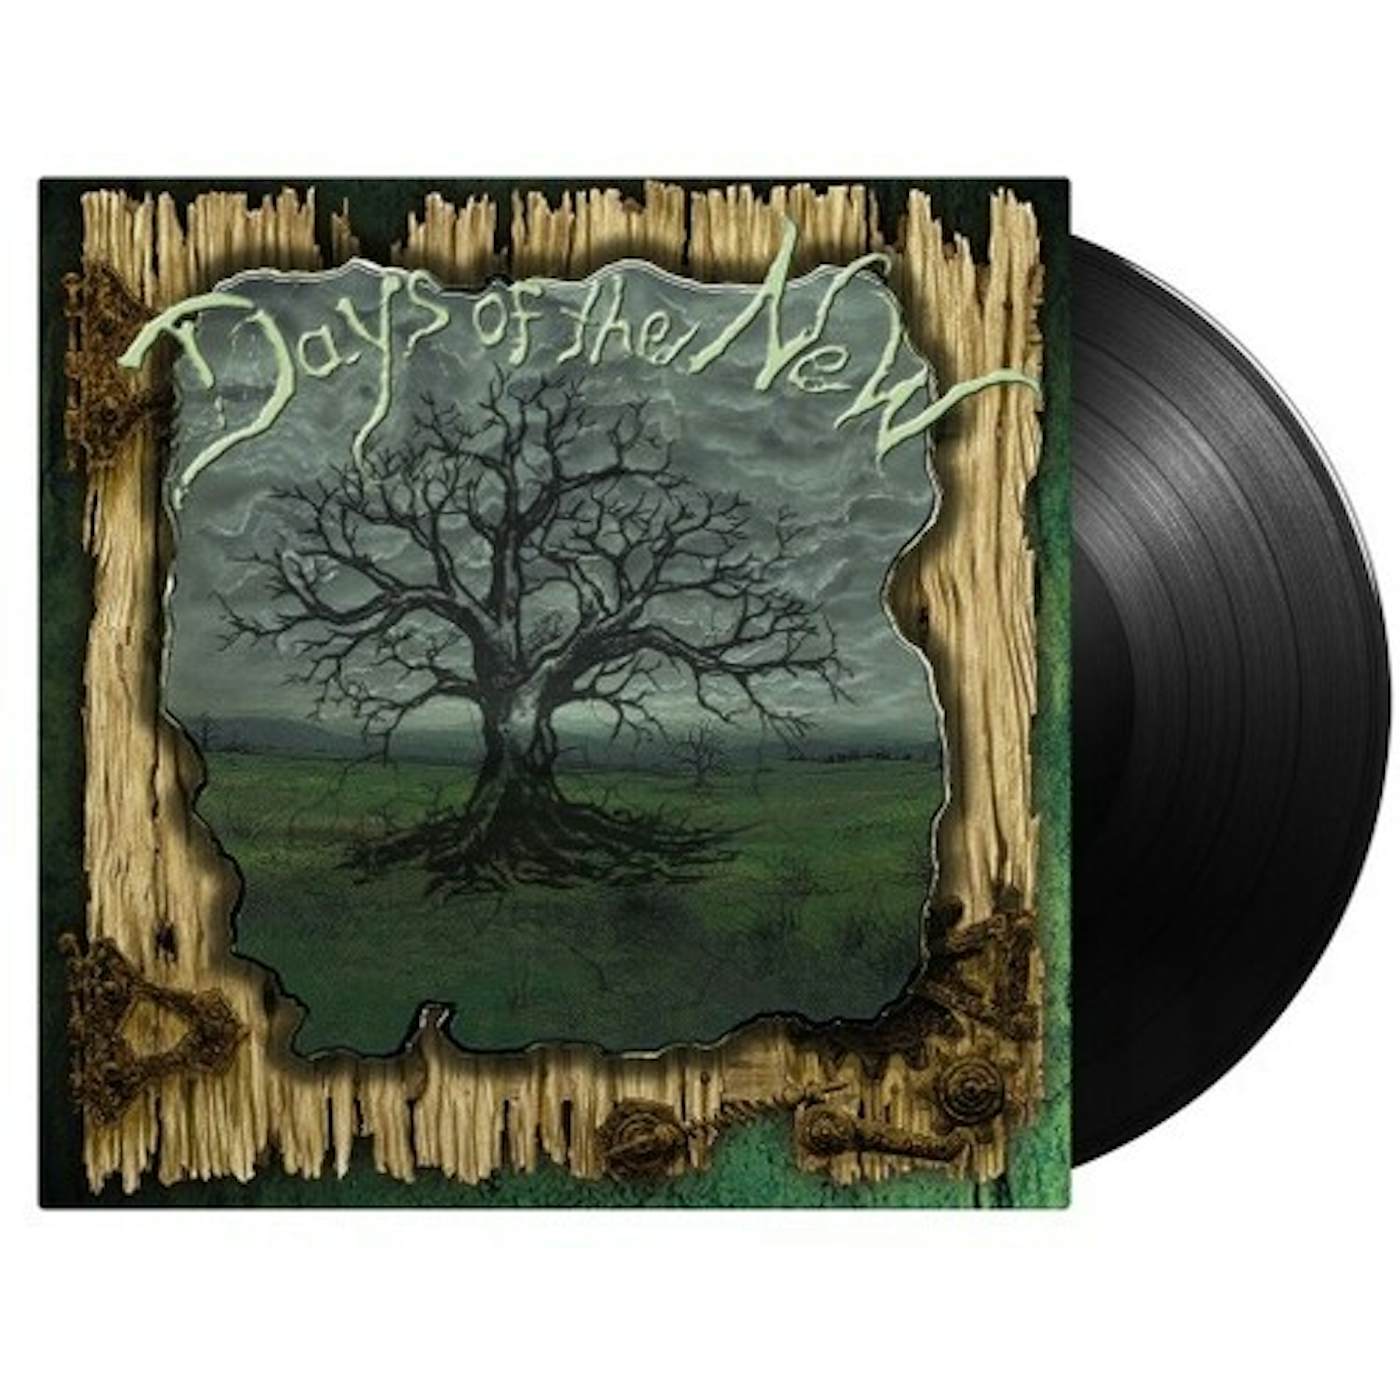  Days Of The New 2 S/T ( Green ) Vinyl Record